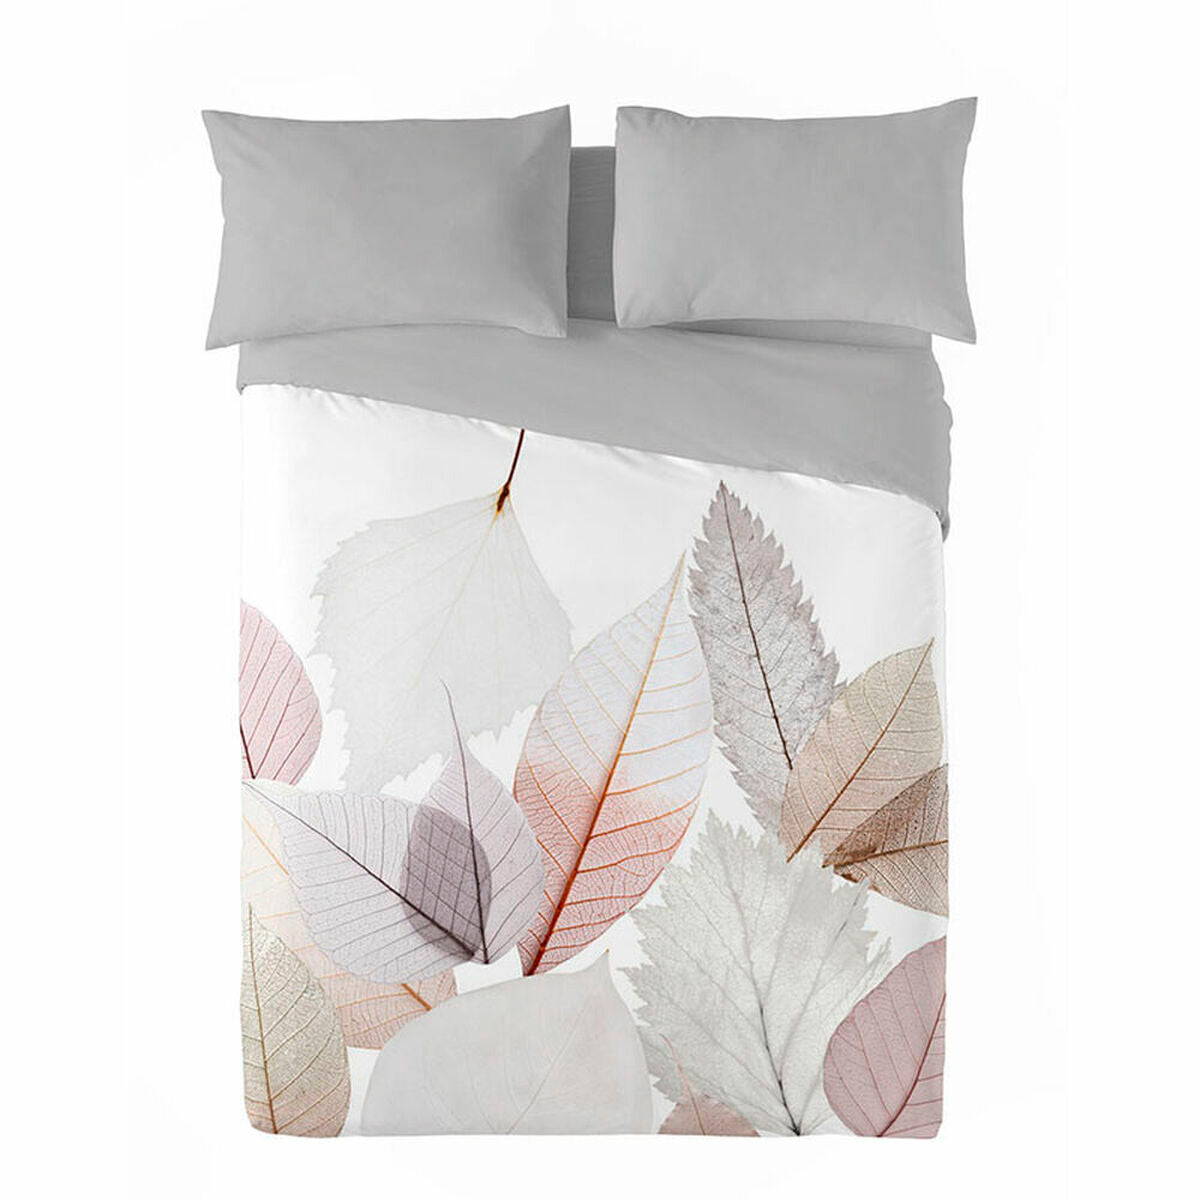 Housse de Couette Icehome Fall Lit king size (260 x 220 cm)